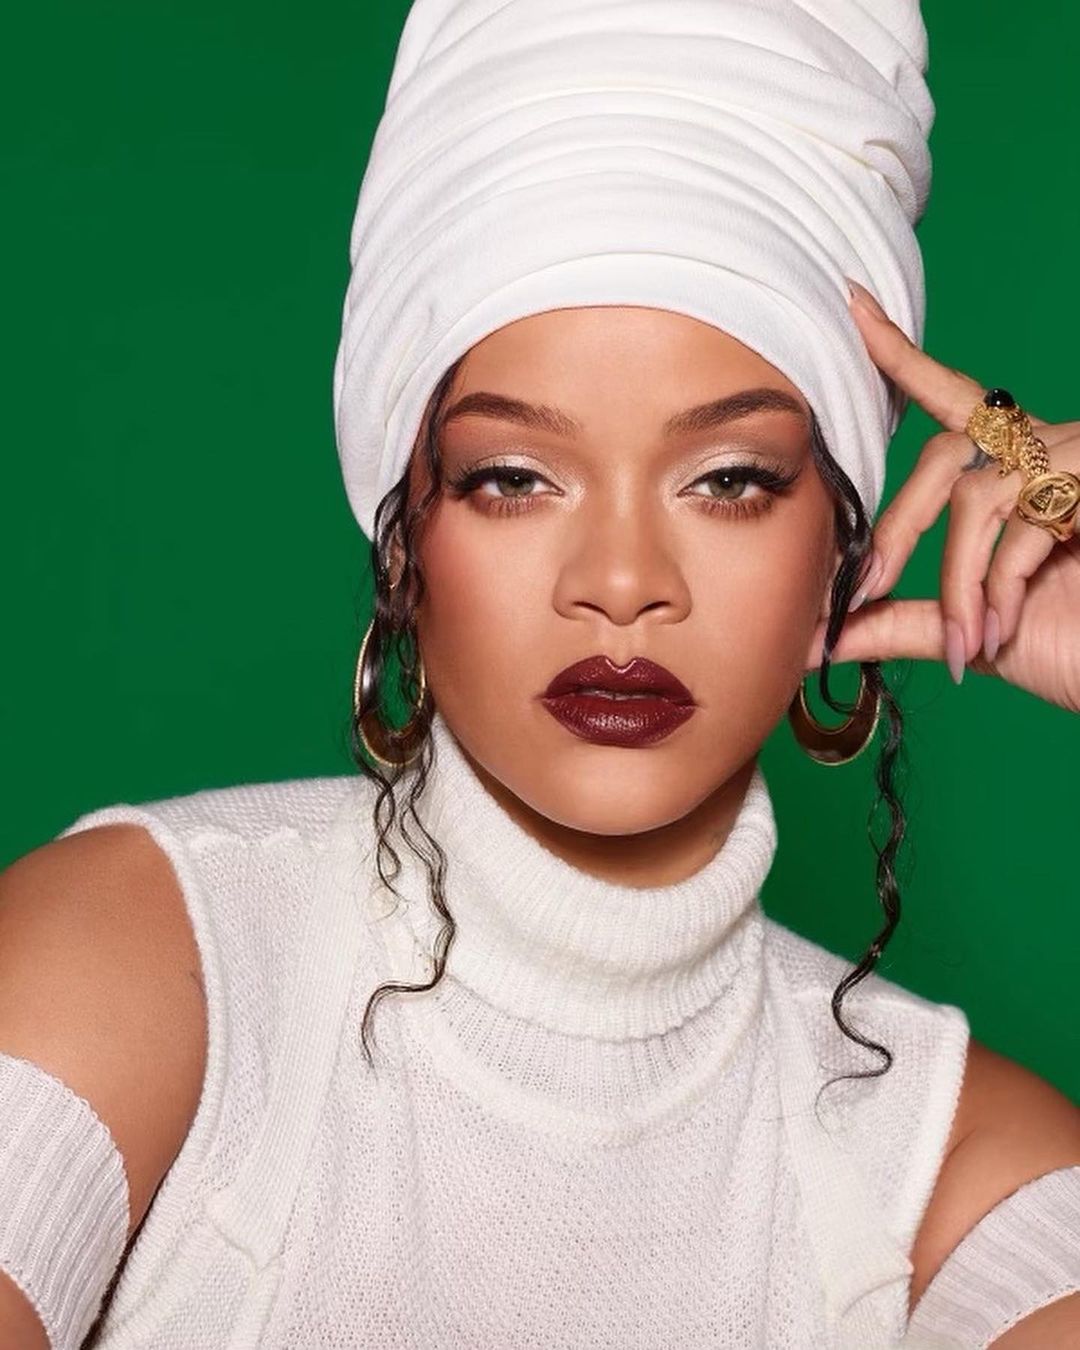 Rihanna Returns To Music After Six Years: A Look At Her